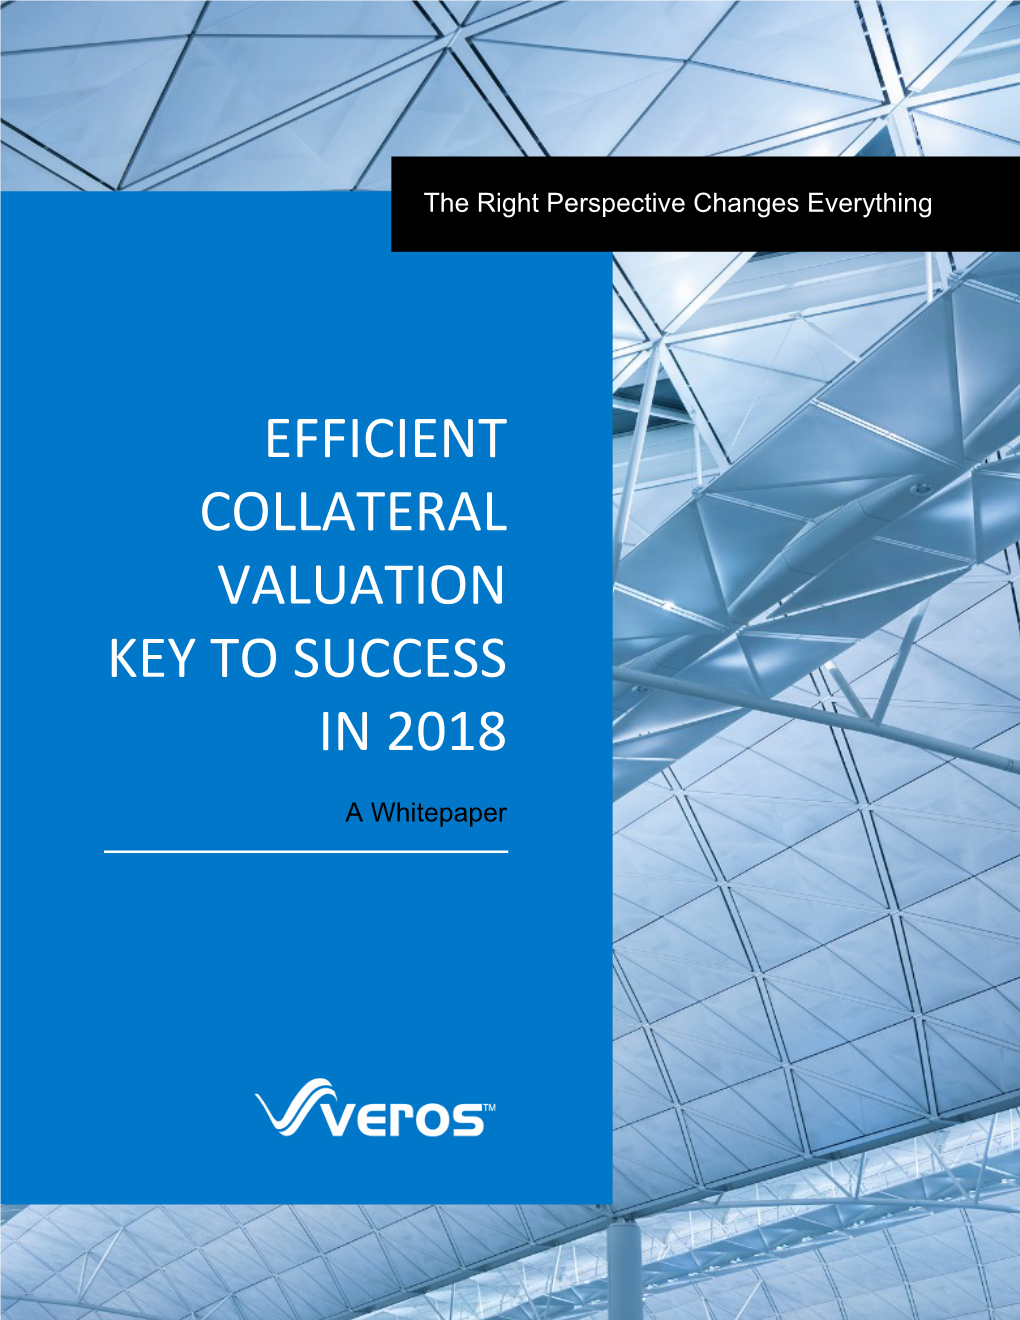 Efficient Collateral Valuation Key to Success in 2018